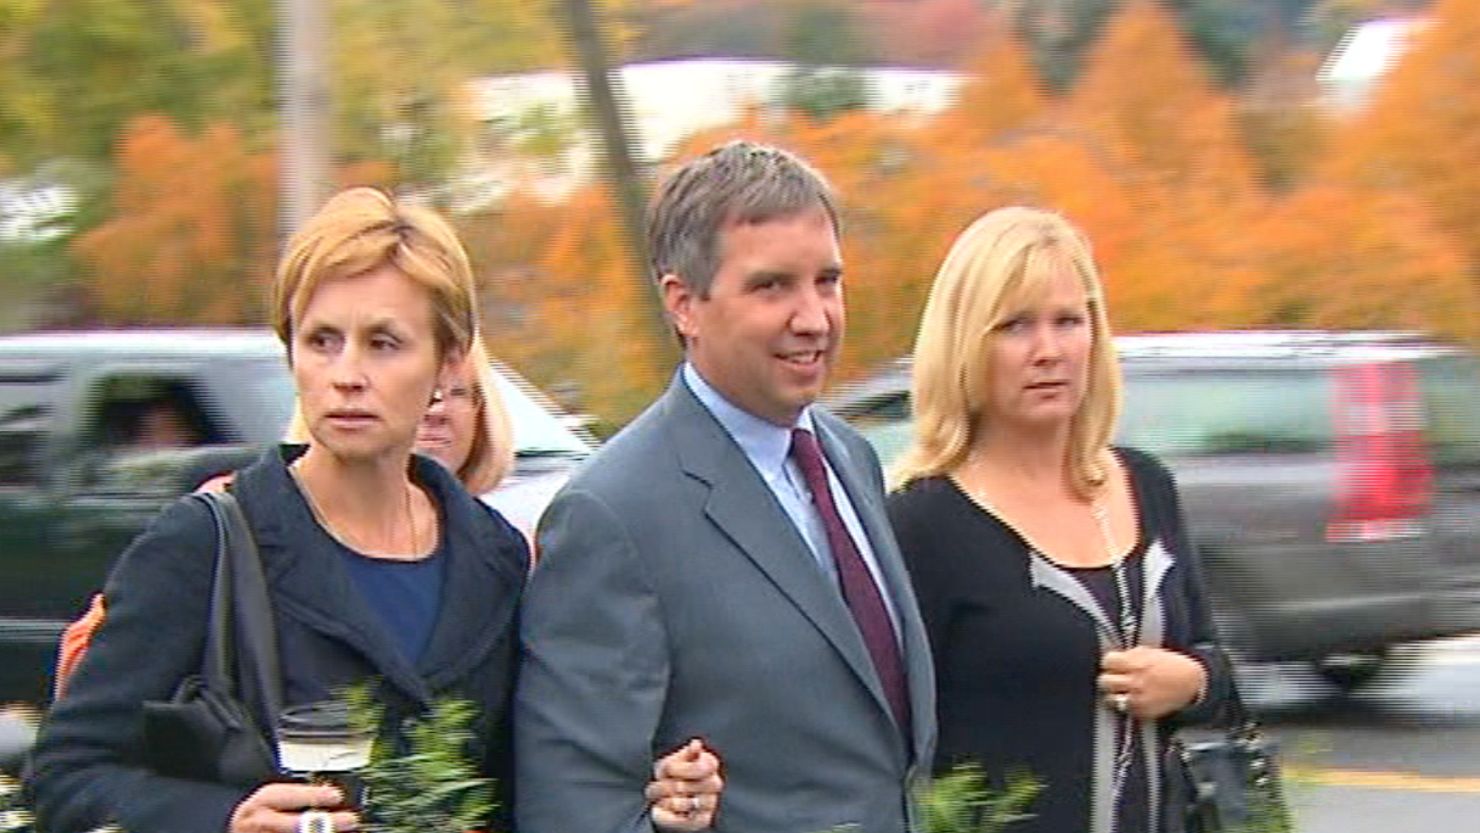 Douglas Kennedy is accused of assaulting two New York nurses in January.